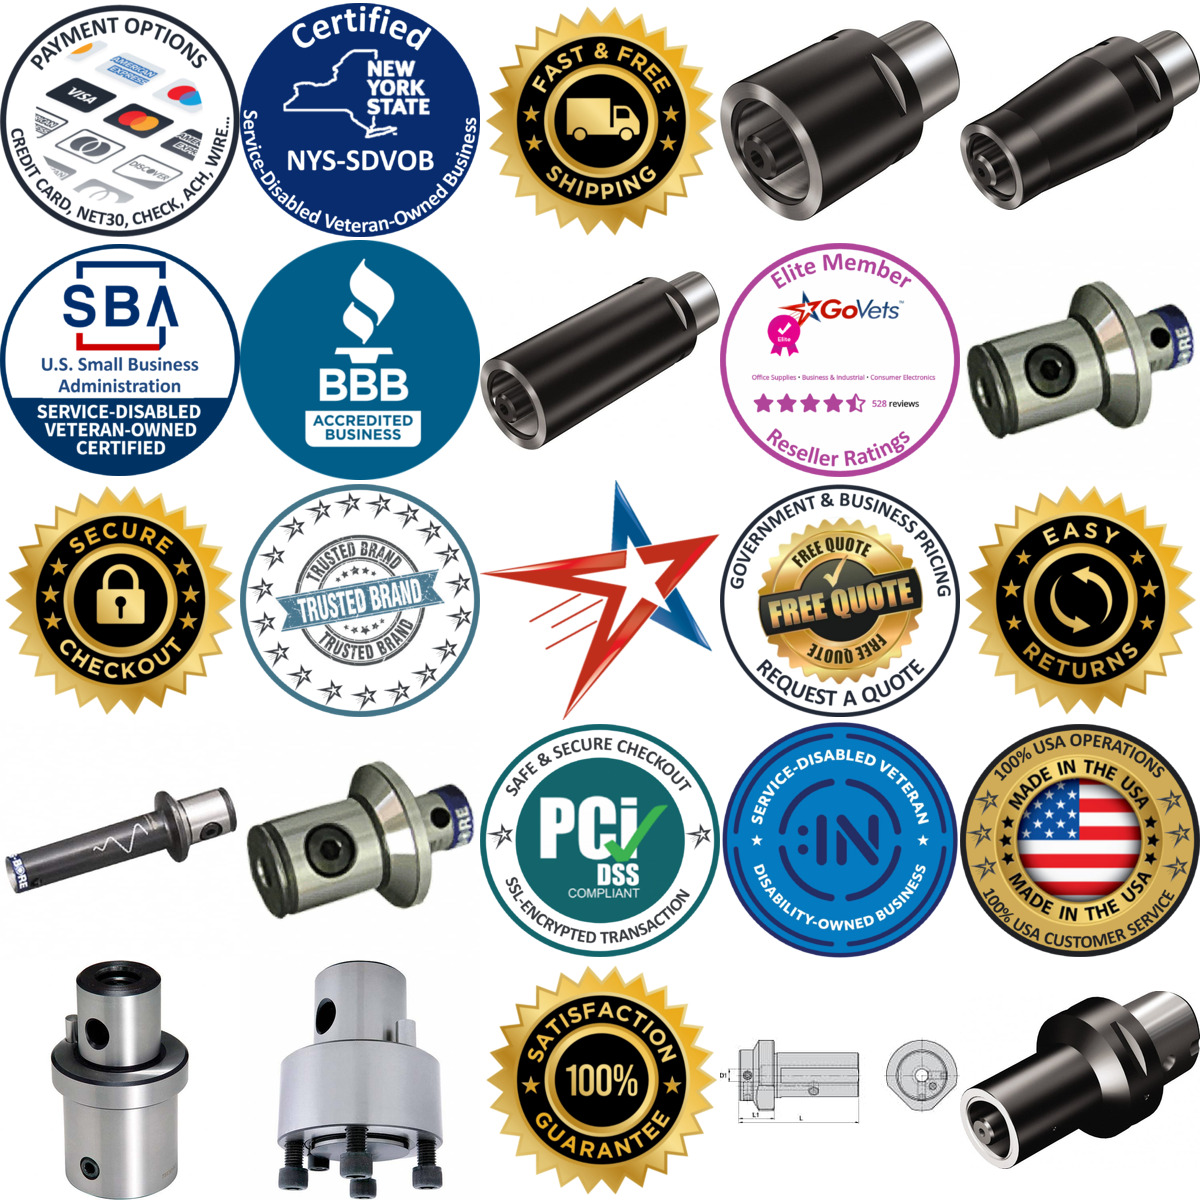 A selection of Boring Bar Reducing Adapters products on GoVets